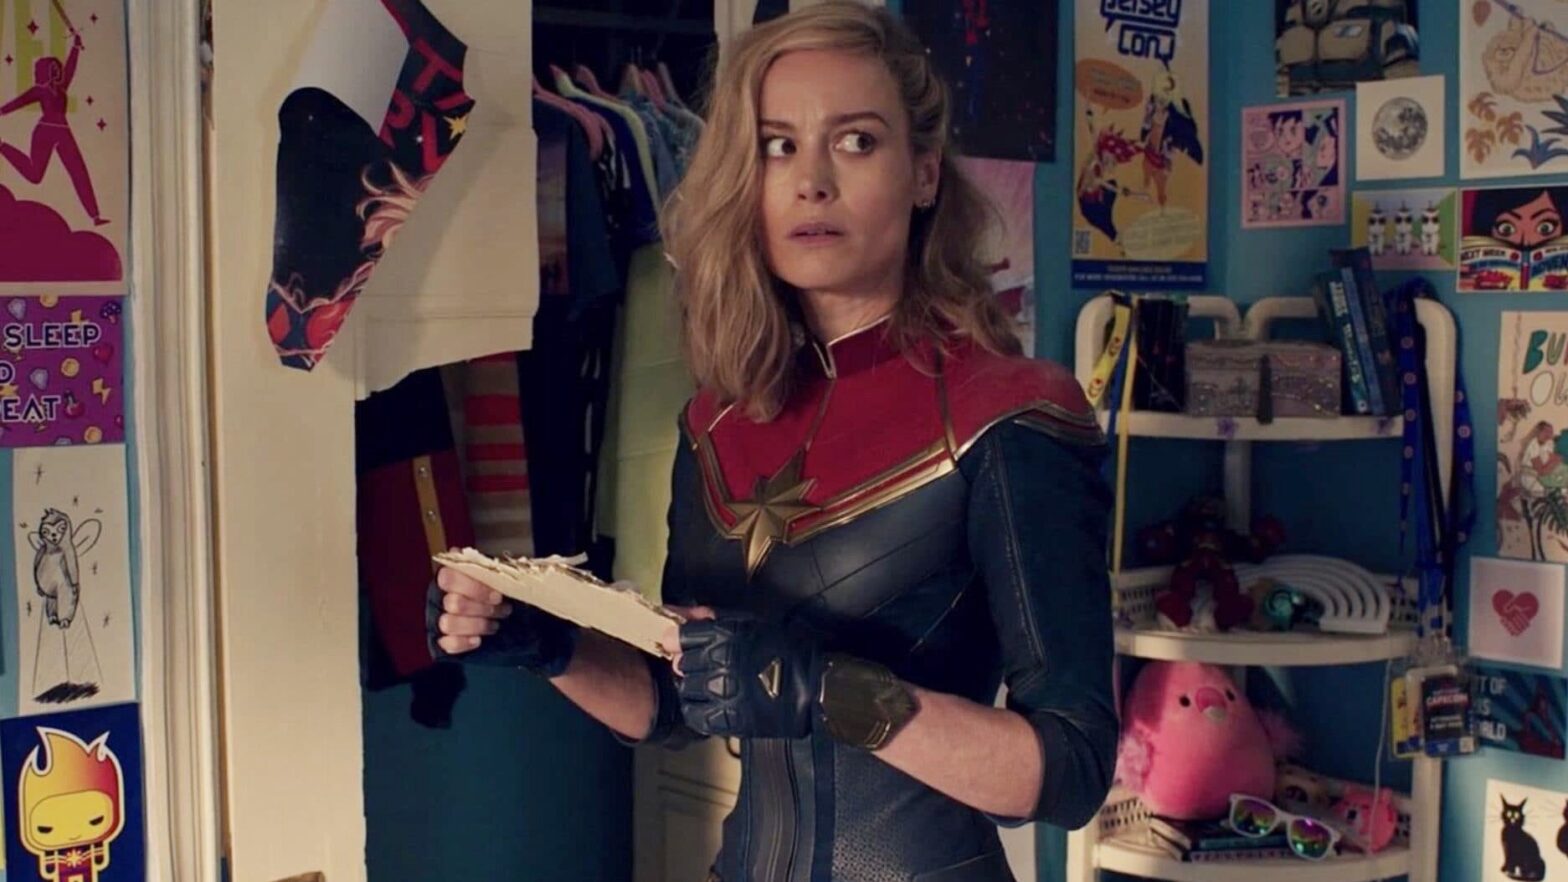 See Brie Larson Take Selfies In Just A Bra And Jeans